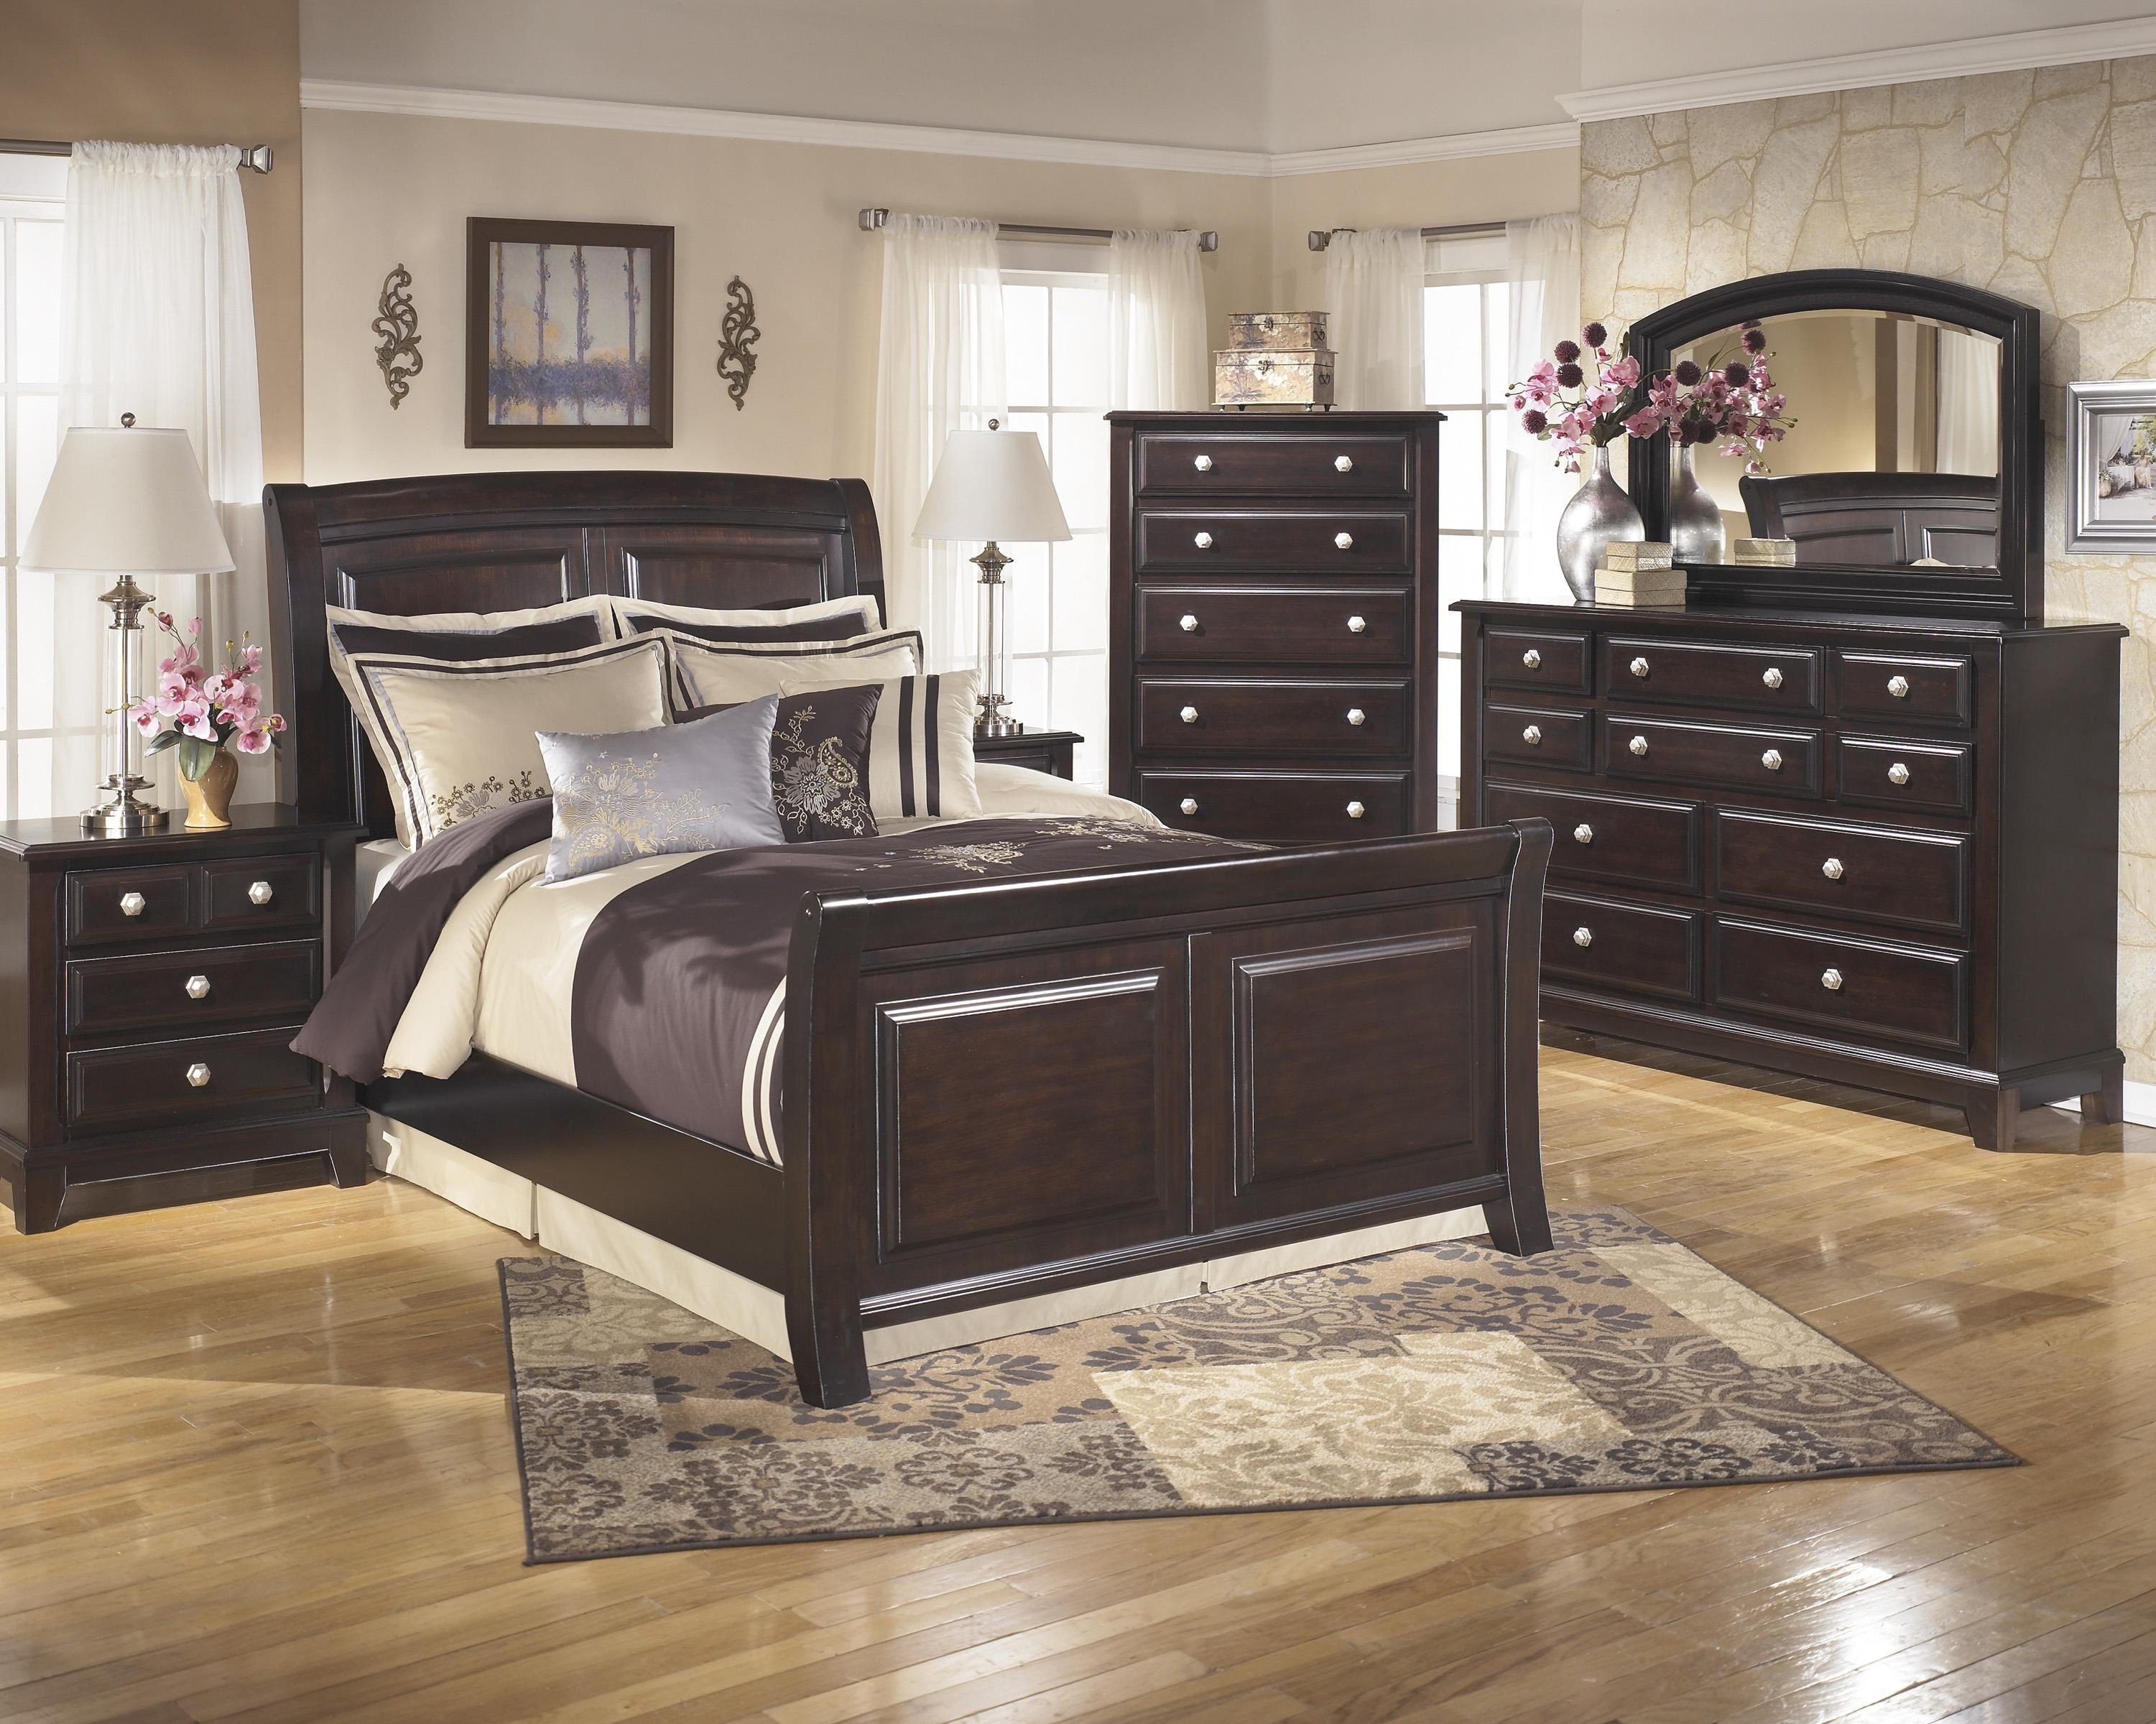 Cheap Bedroom Set with Mattress New Ridgley King Bedroom Group by Signature Design by ashley